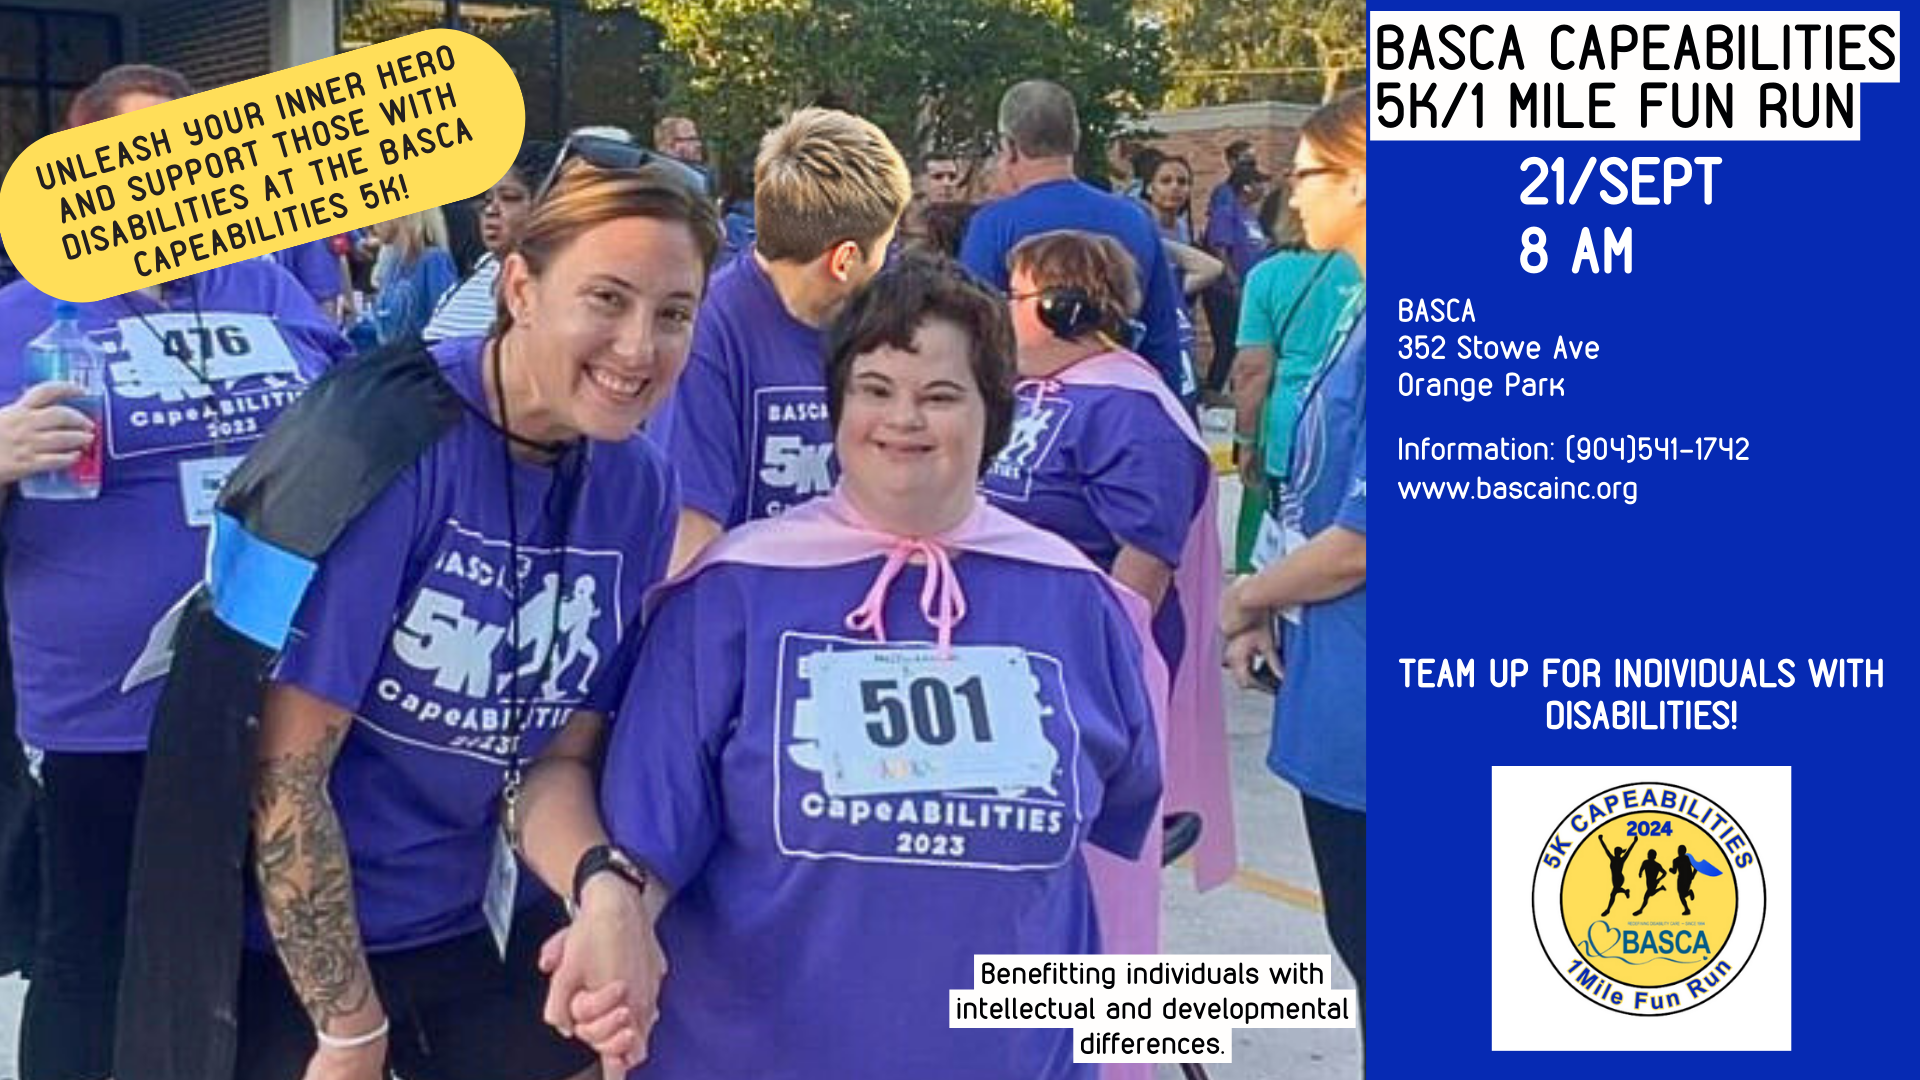 A photograph of two smiling participants in a previous BASCA 5k event, with text announcing the 2024 BASCA 5K.